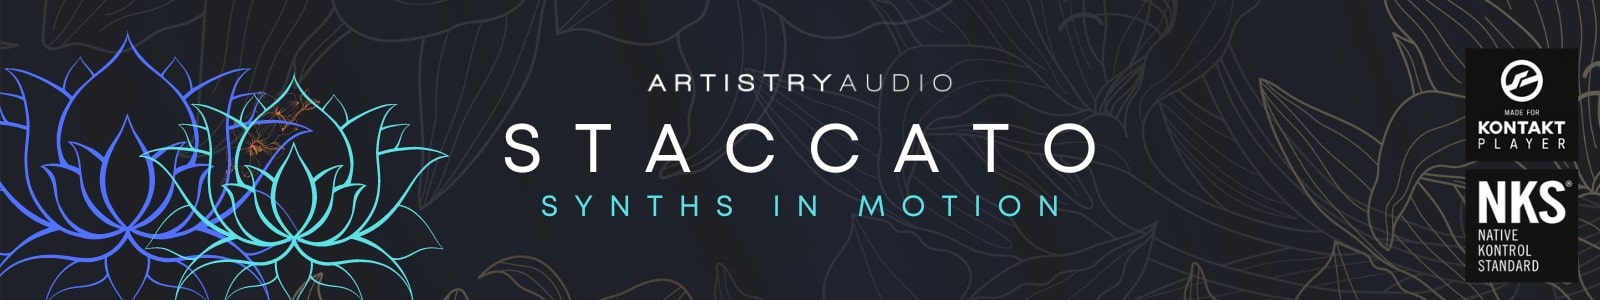 Artistry Audio Staccato